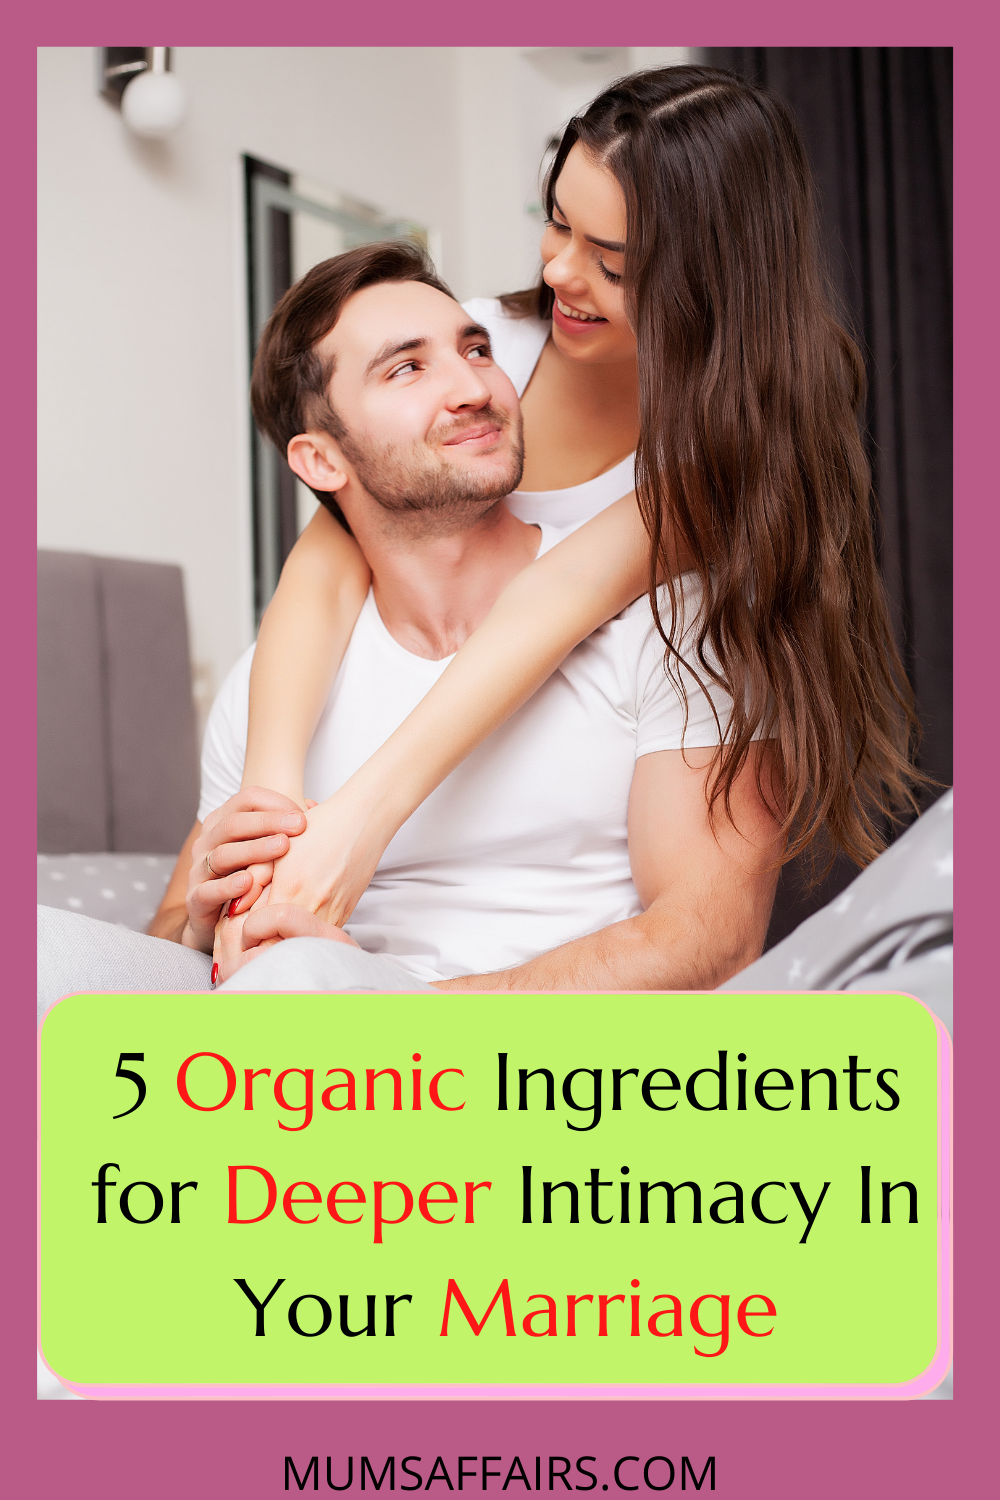 Organic ingredients for deeper intimacy in your marriage